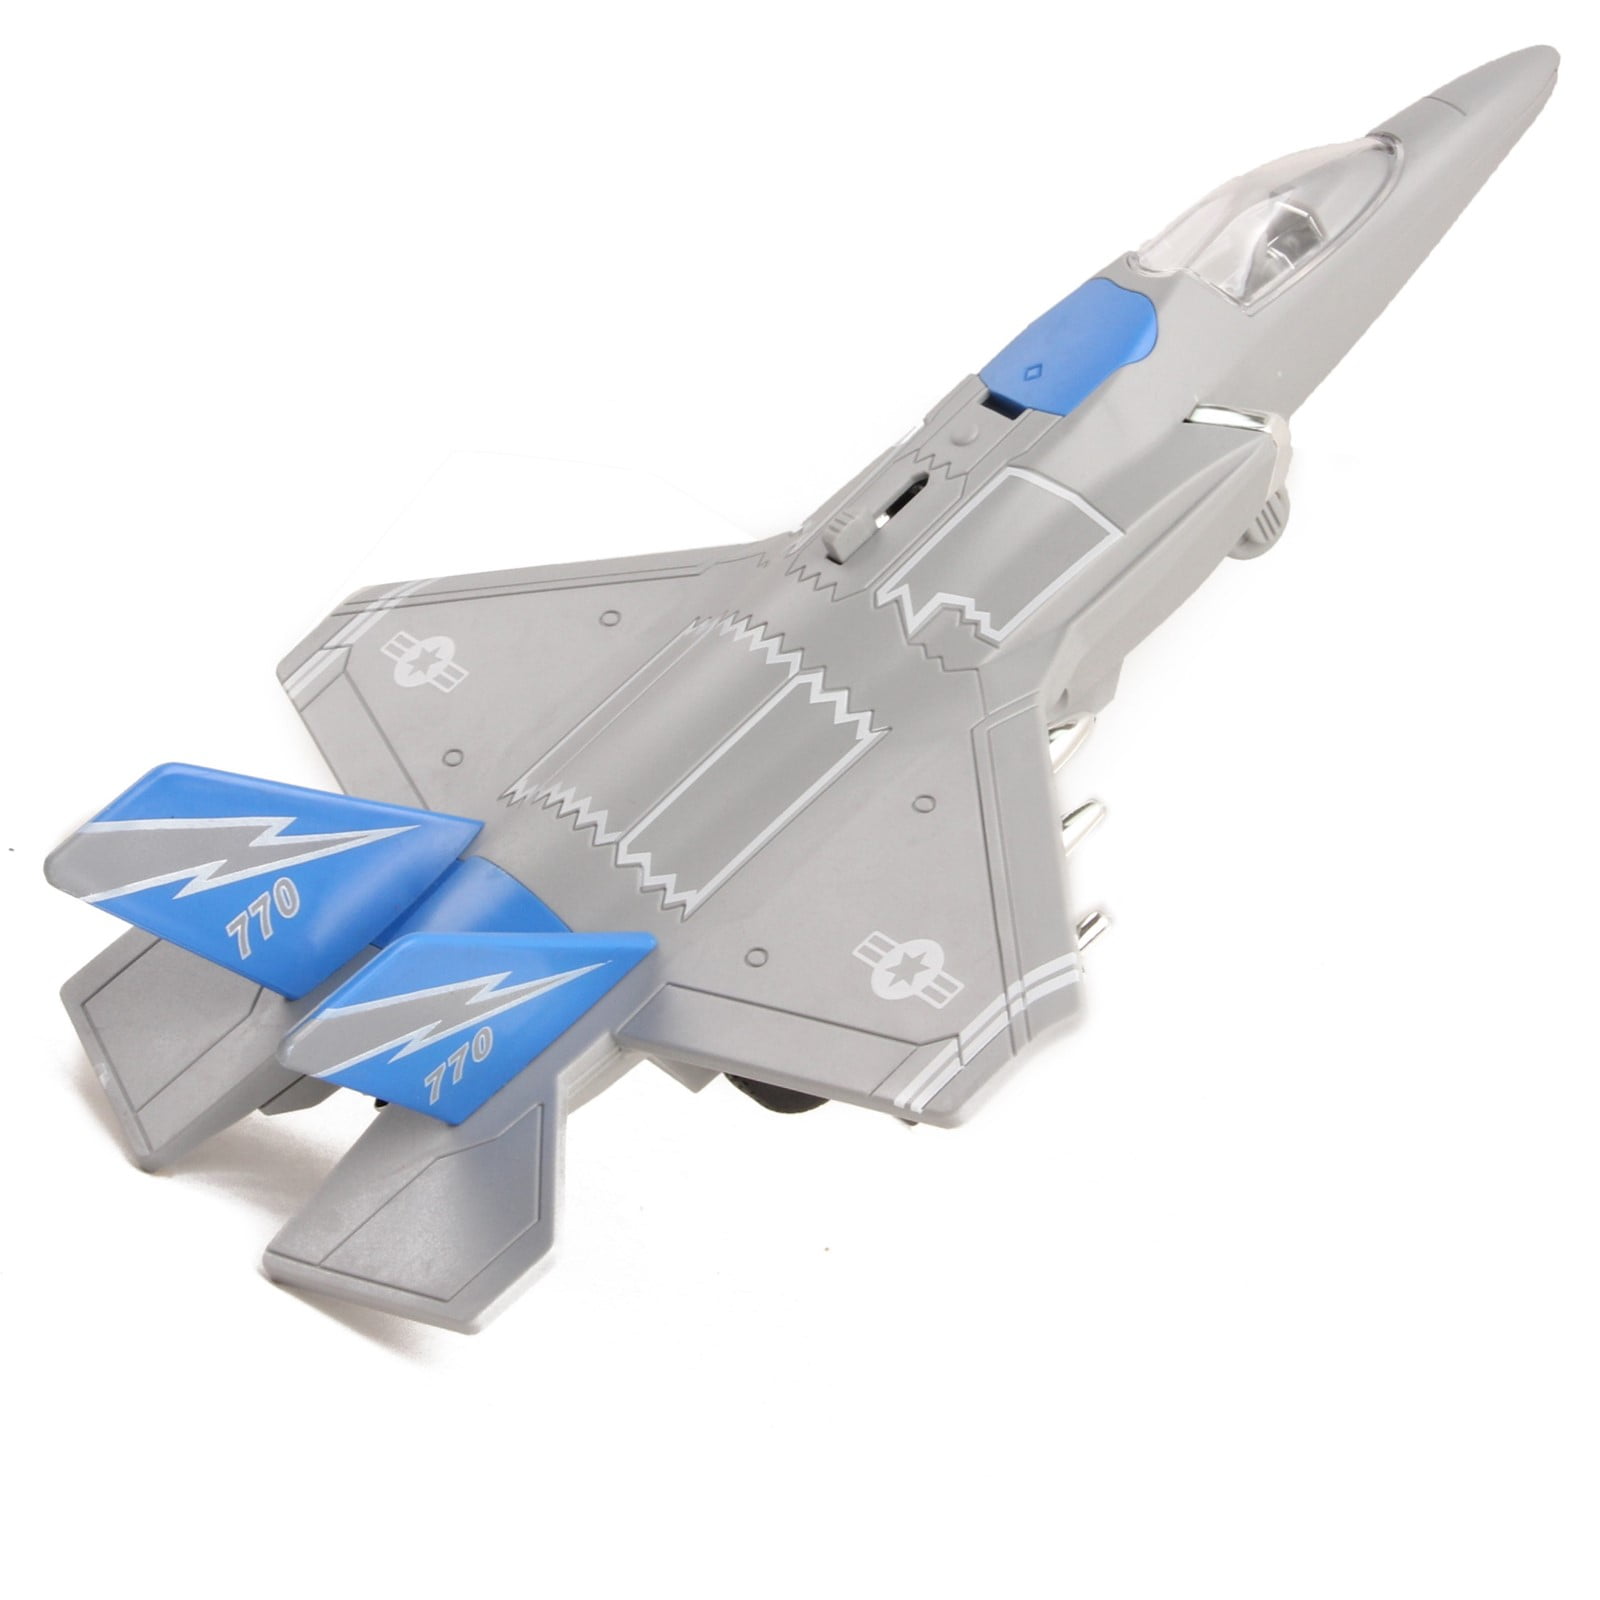 KIDS ARMY FIGHTER JET WITH LIGHTS AND SOUNDS MILITARY ACTION ADVENTURE TOY 